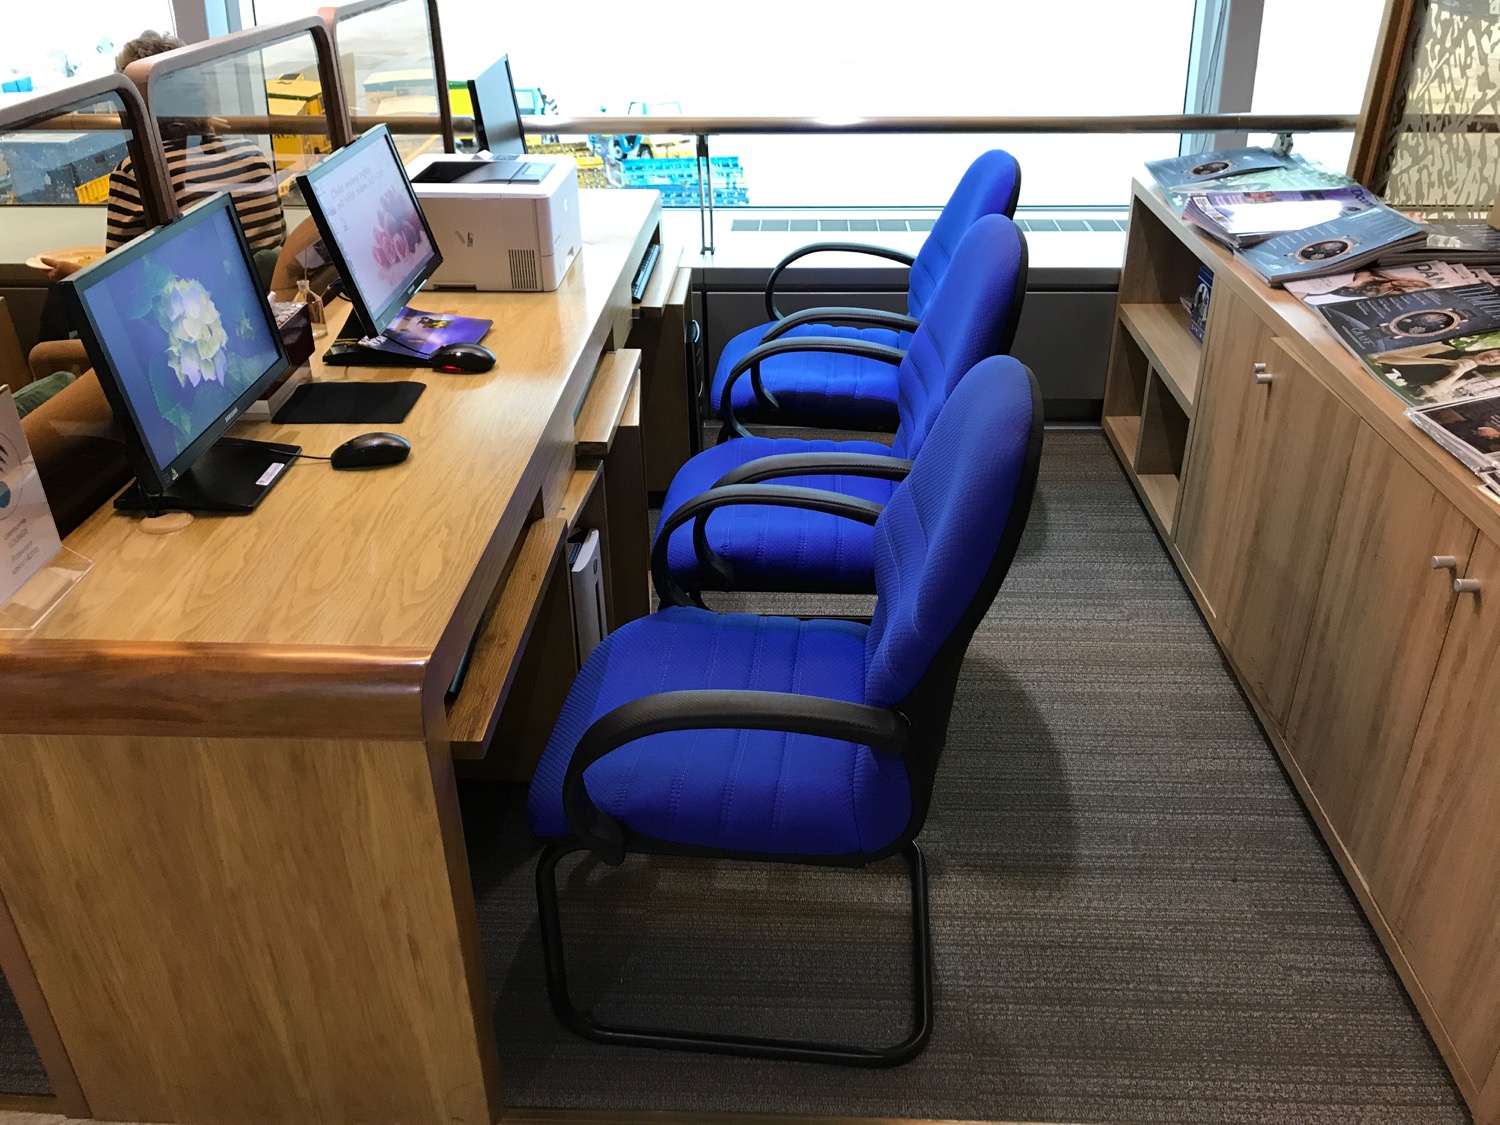 a row of blue chairs and a desk with computers